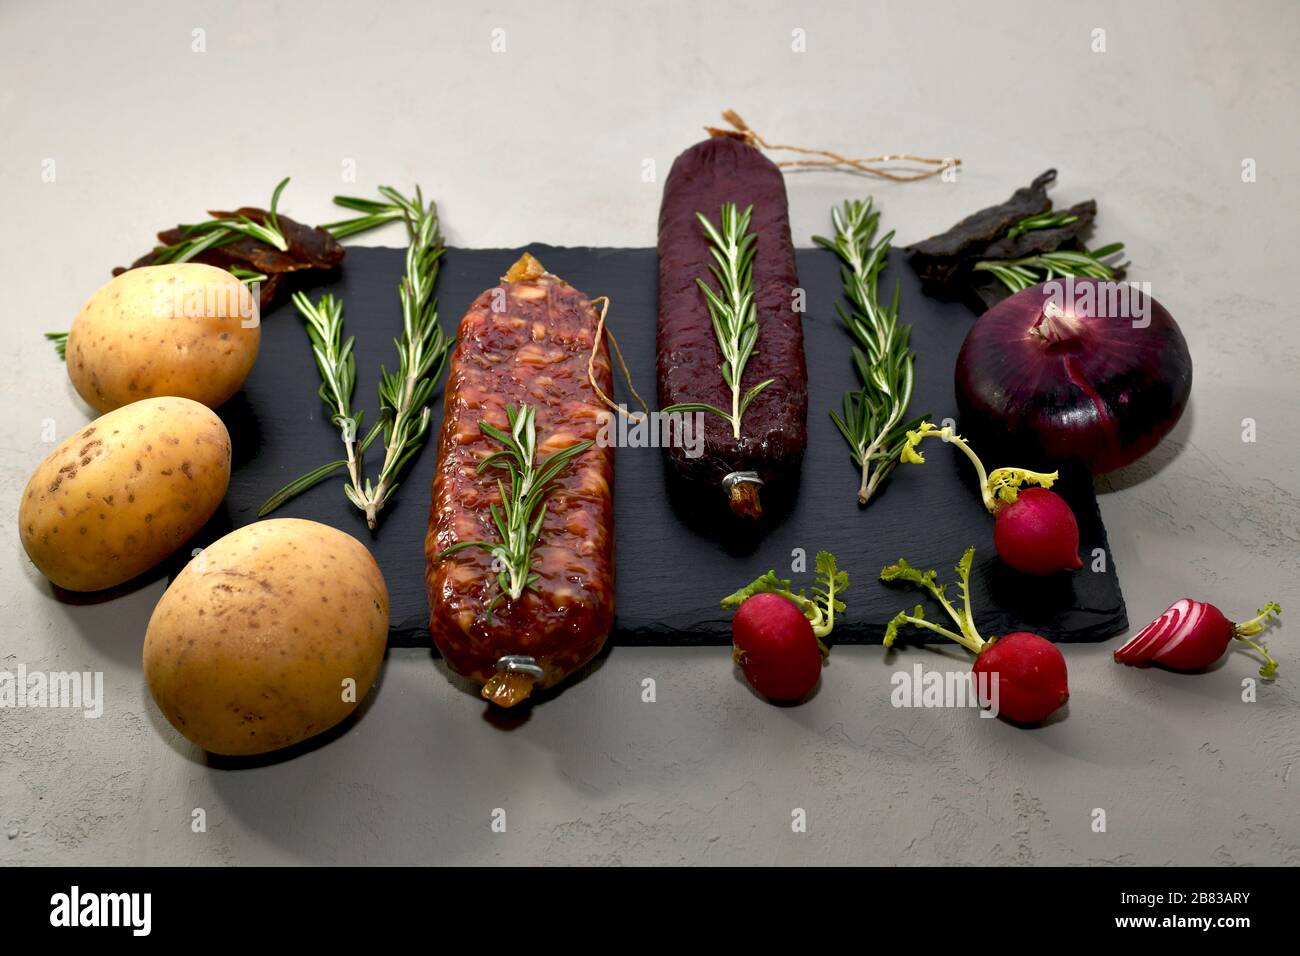 Smoked smoked meat with rosemary and vegetables on a black slate on a gray background, front view at an angle. Stock Photo